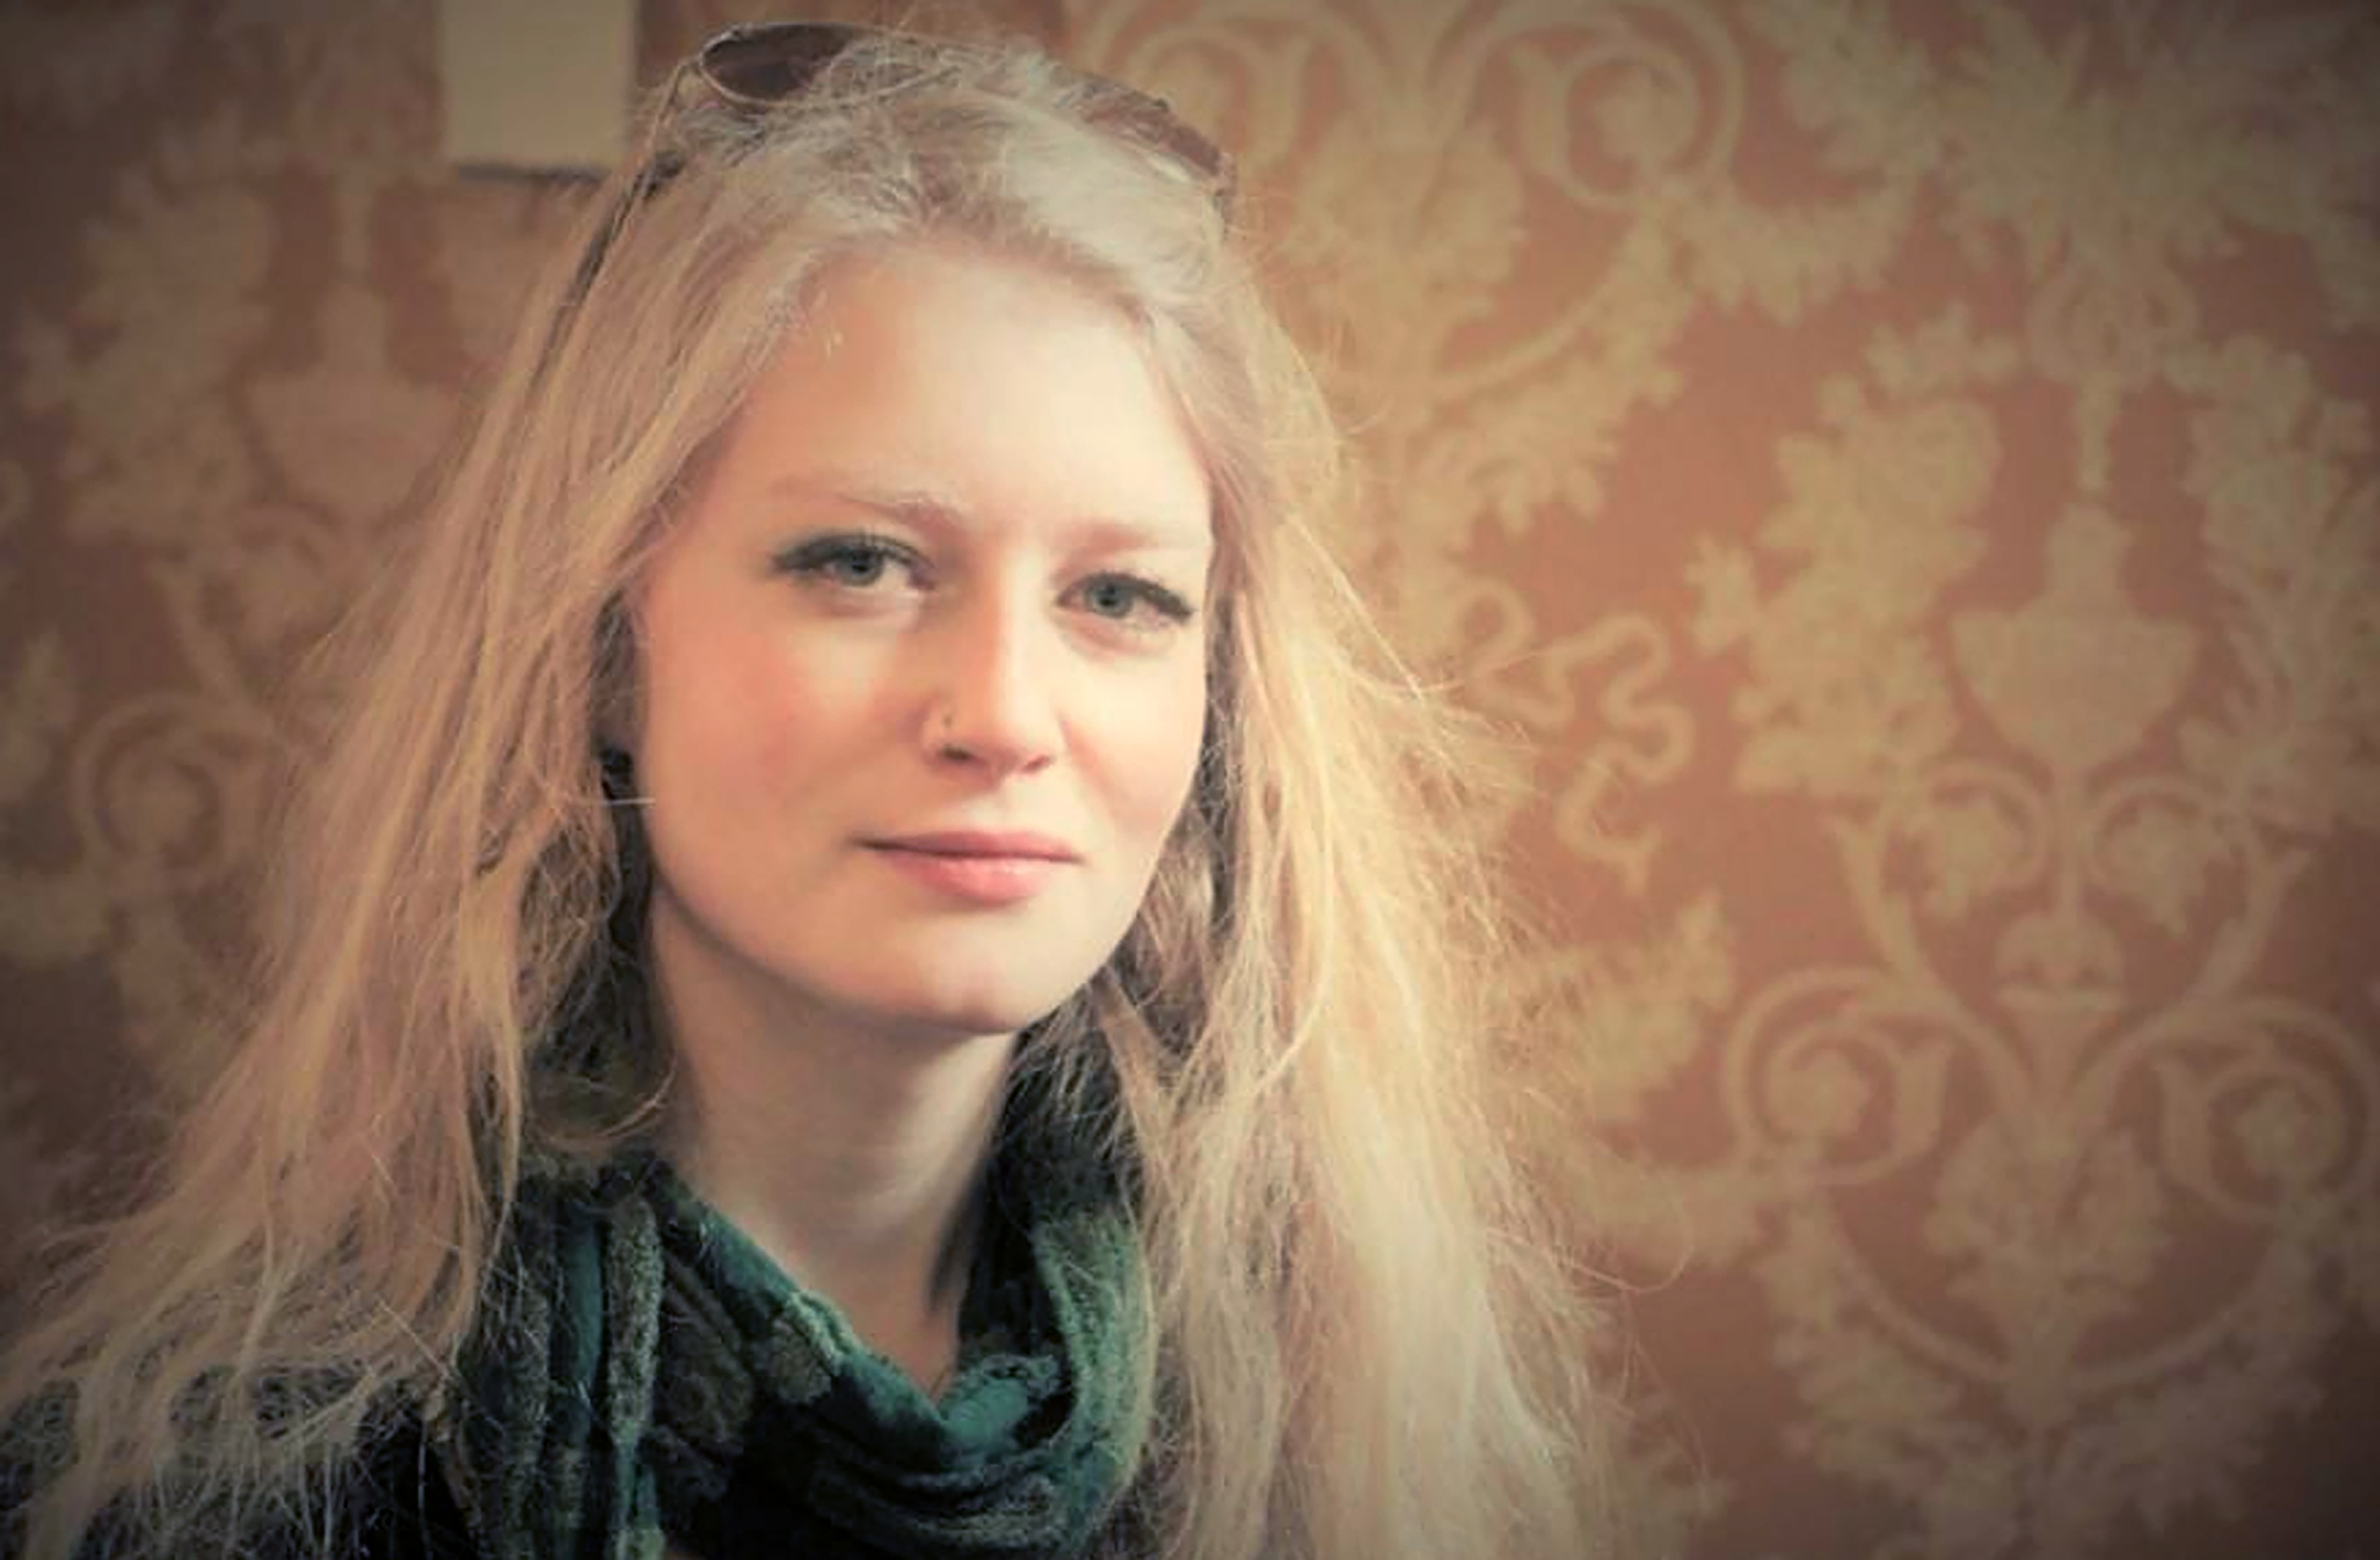 An inquest jury has been told there is not enough evidence to find police failings around the search for Gaia Pope’s contributed to her death